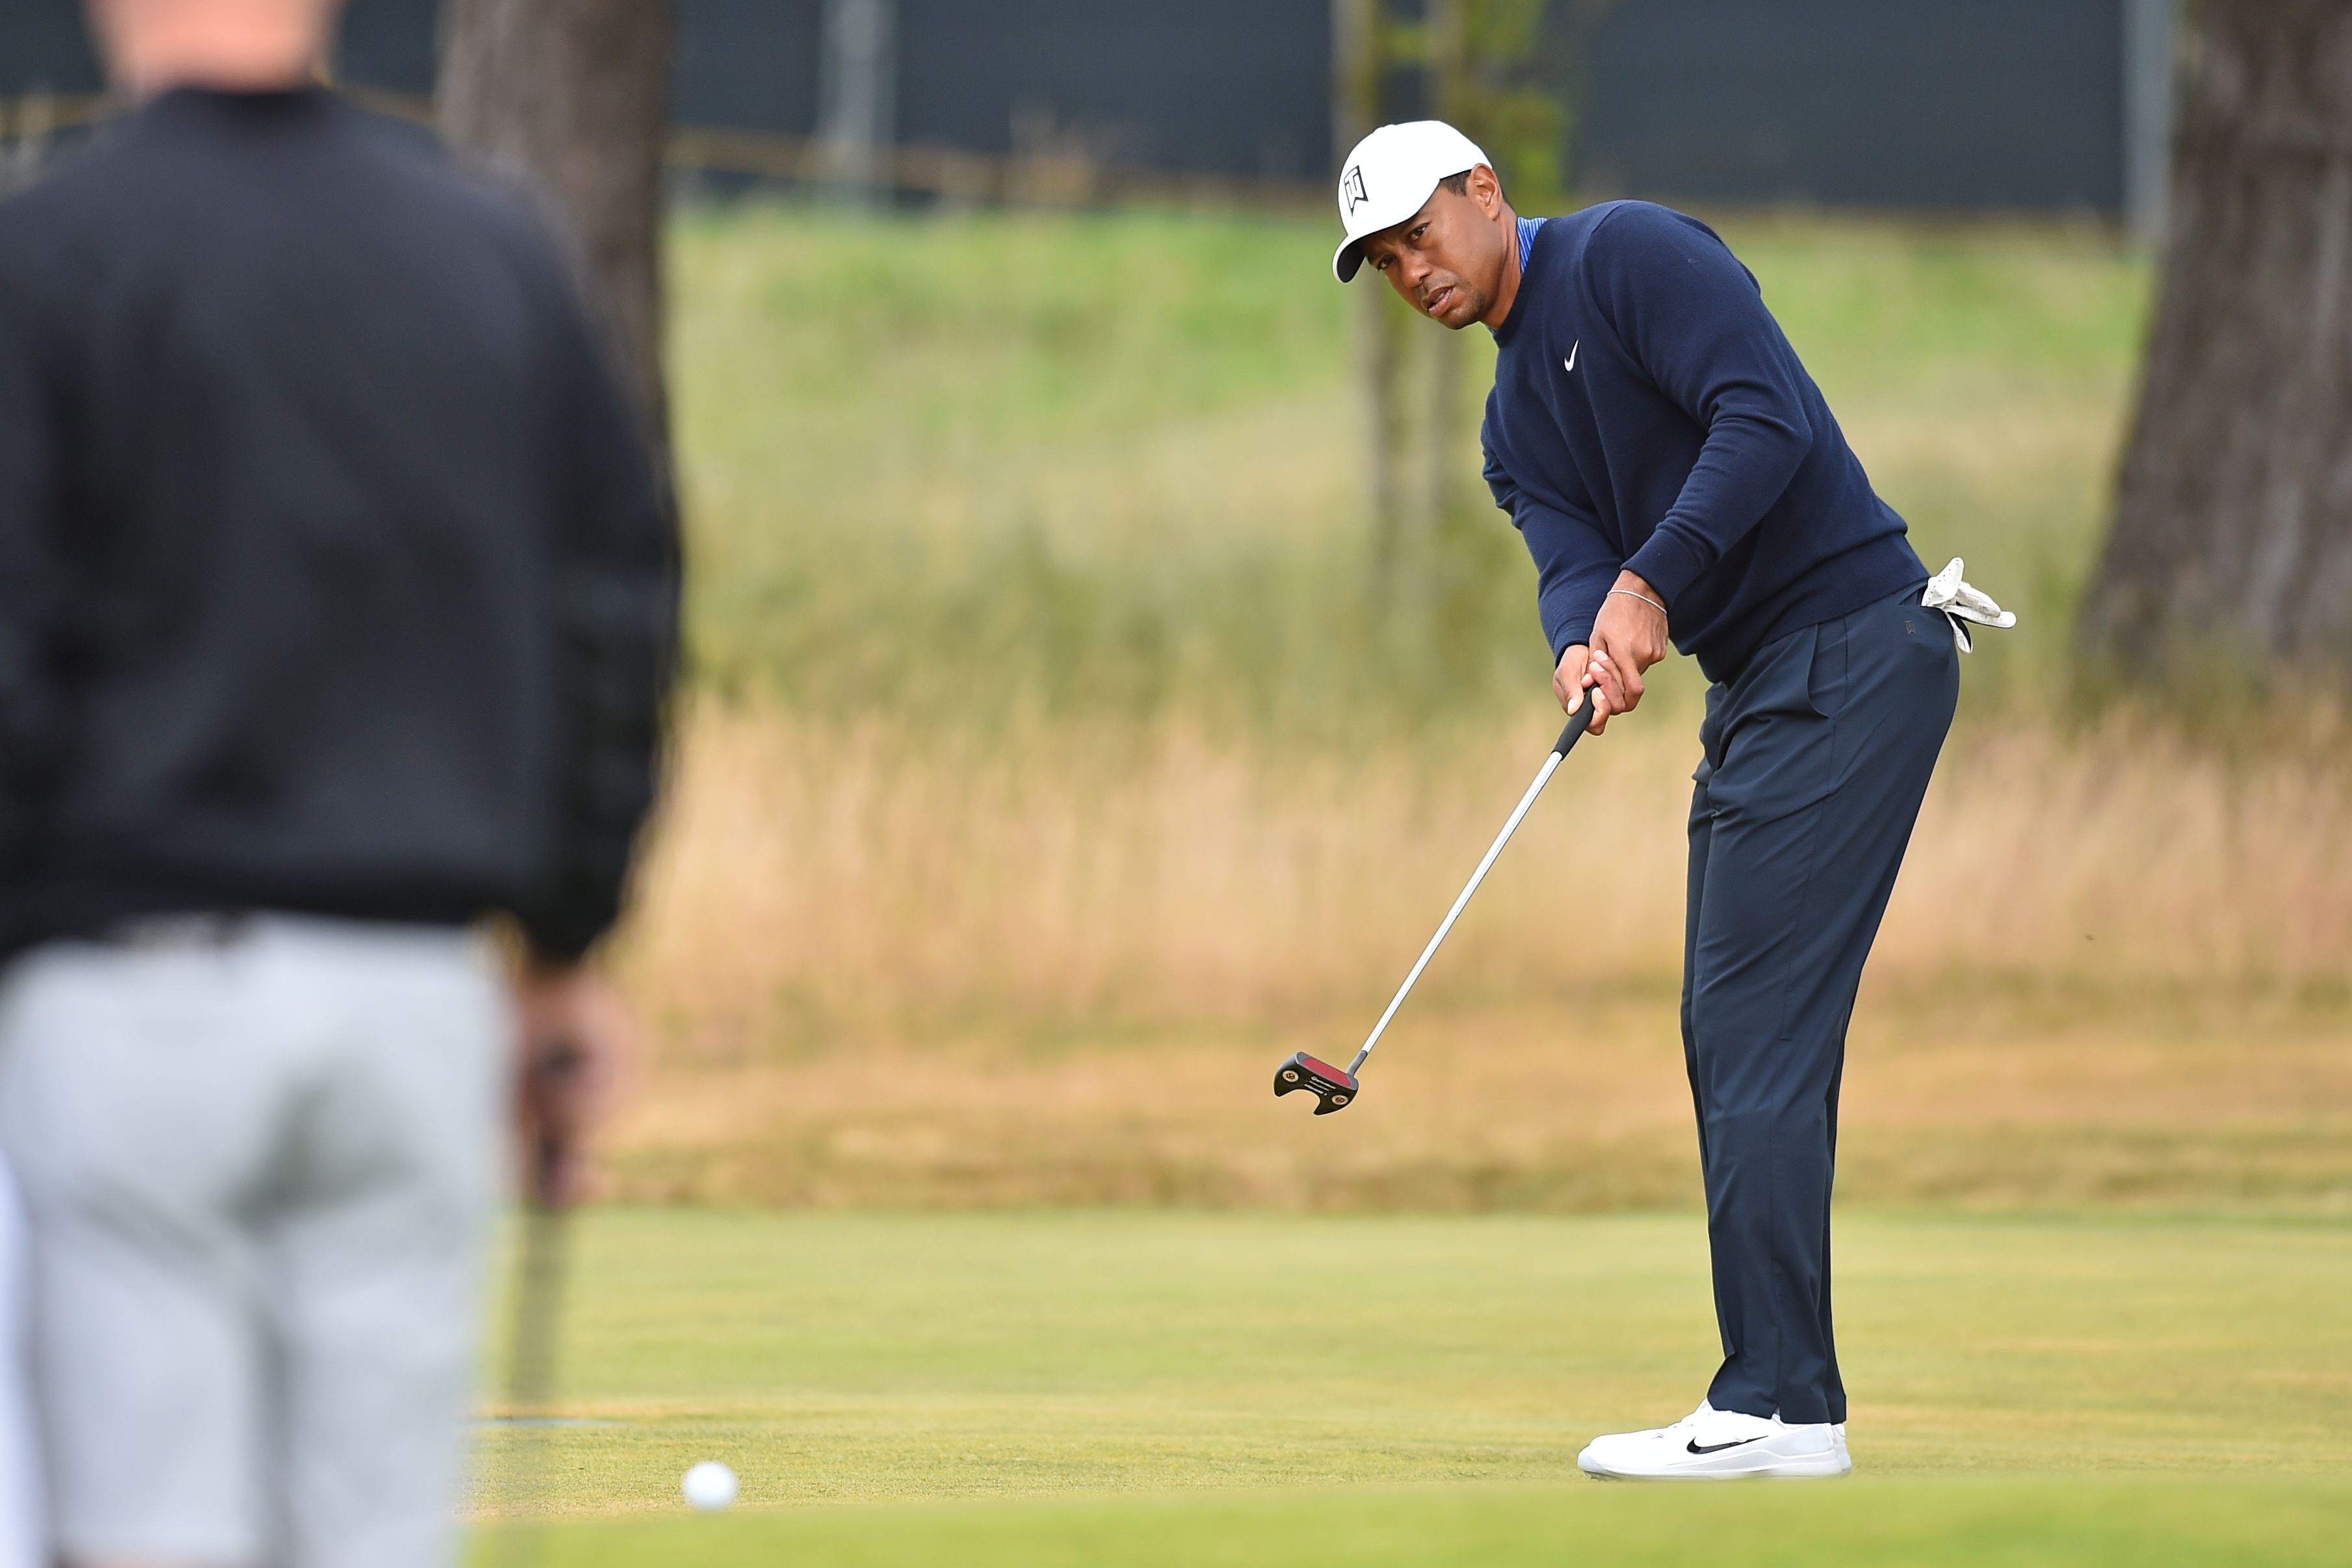 Tiger Woods: My new TaylorMade putter will help me at The Open